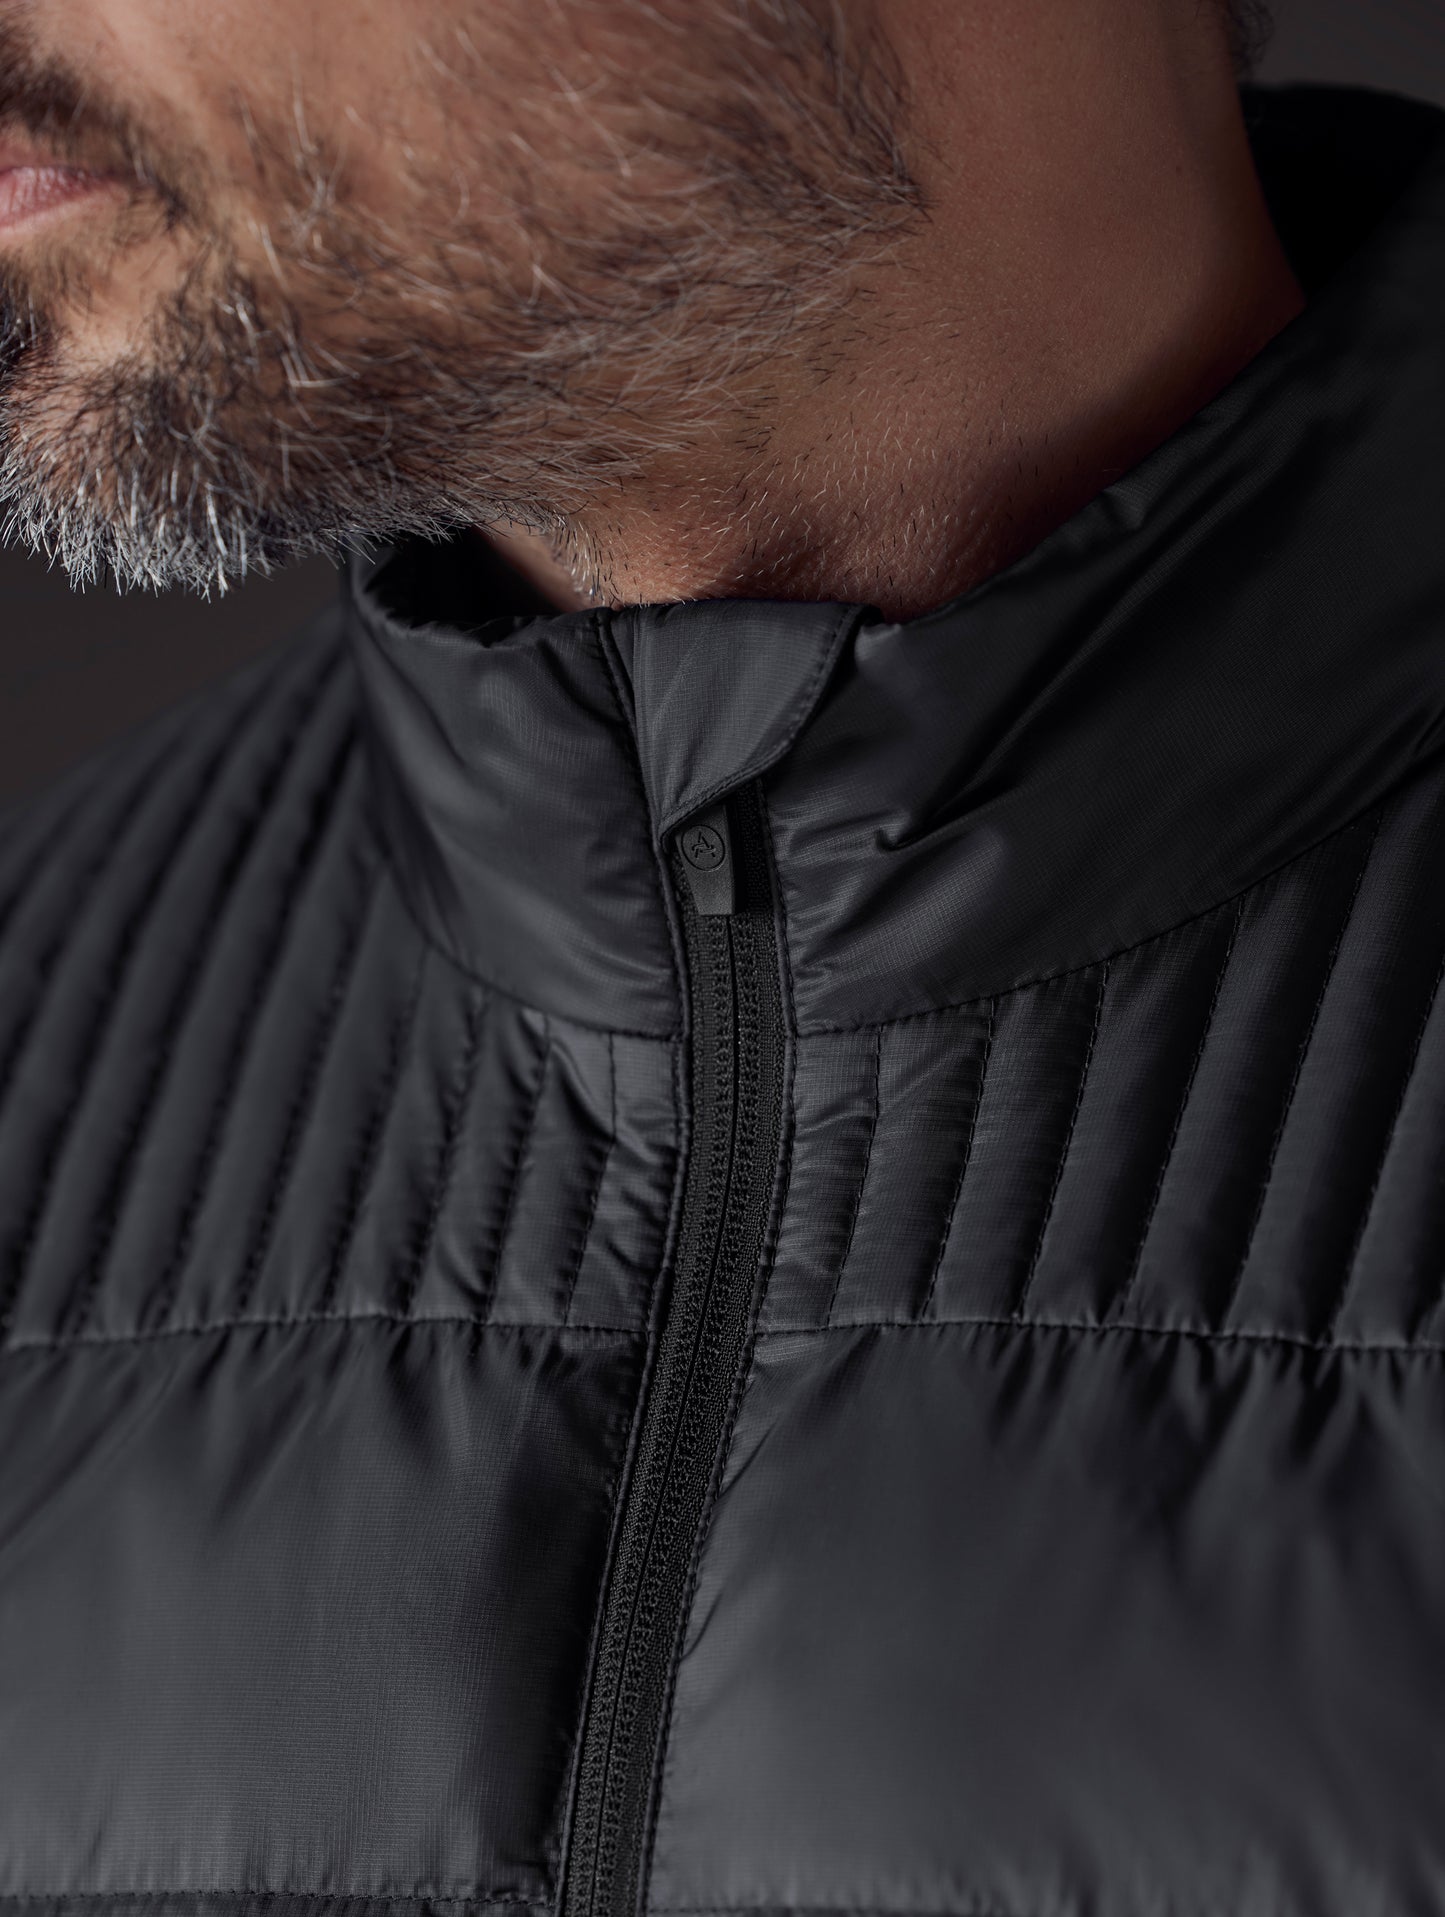 man wearing a black insulated jacket from AETHER Apparel